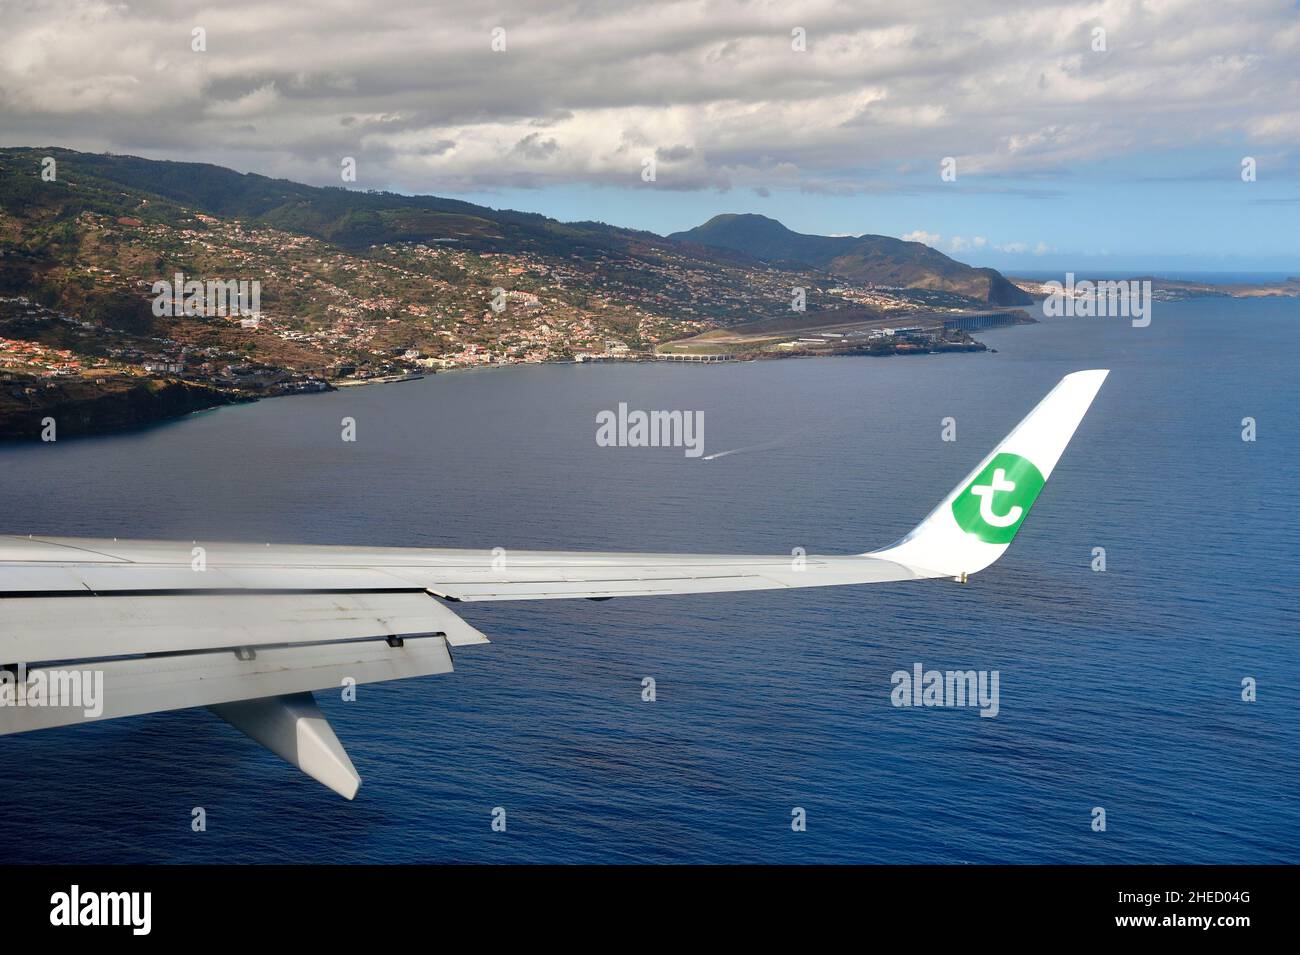 Portugal, Madeira Island, Madeira Cristiano-Ronaldo International Airport which has a 2781m runway extended over the sea thanks to pillars (aerial view) Stock Photo